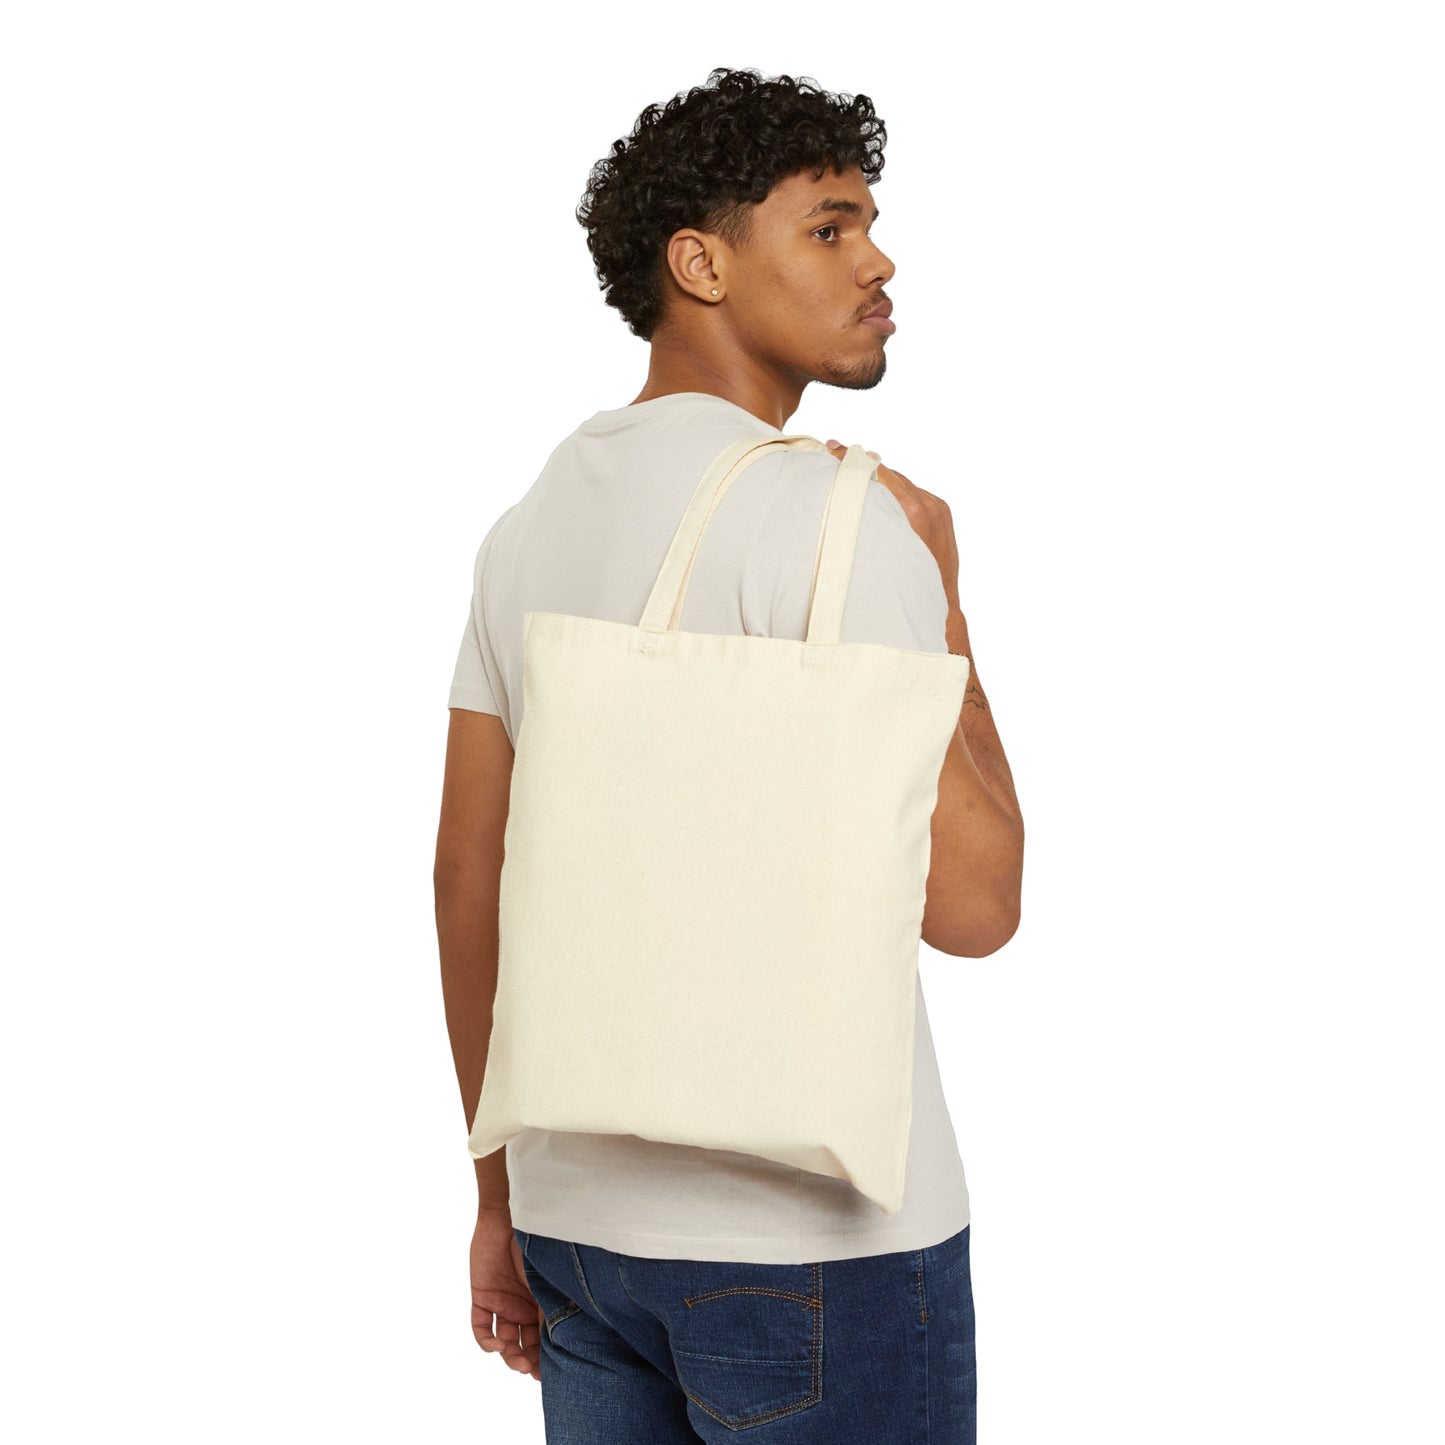 Get, Live, Stay Clean Canvas Tote Bag